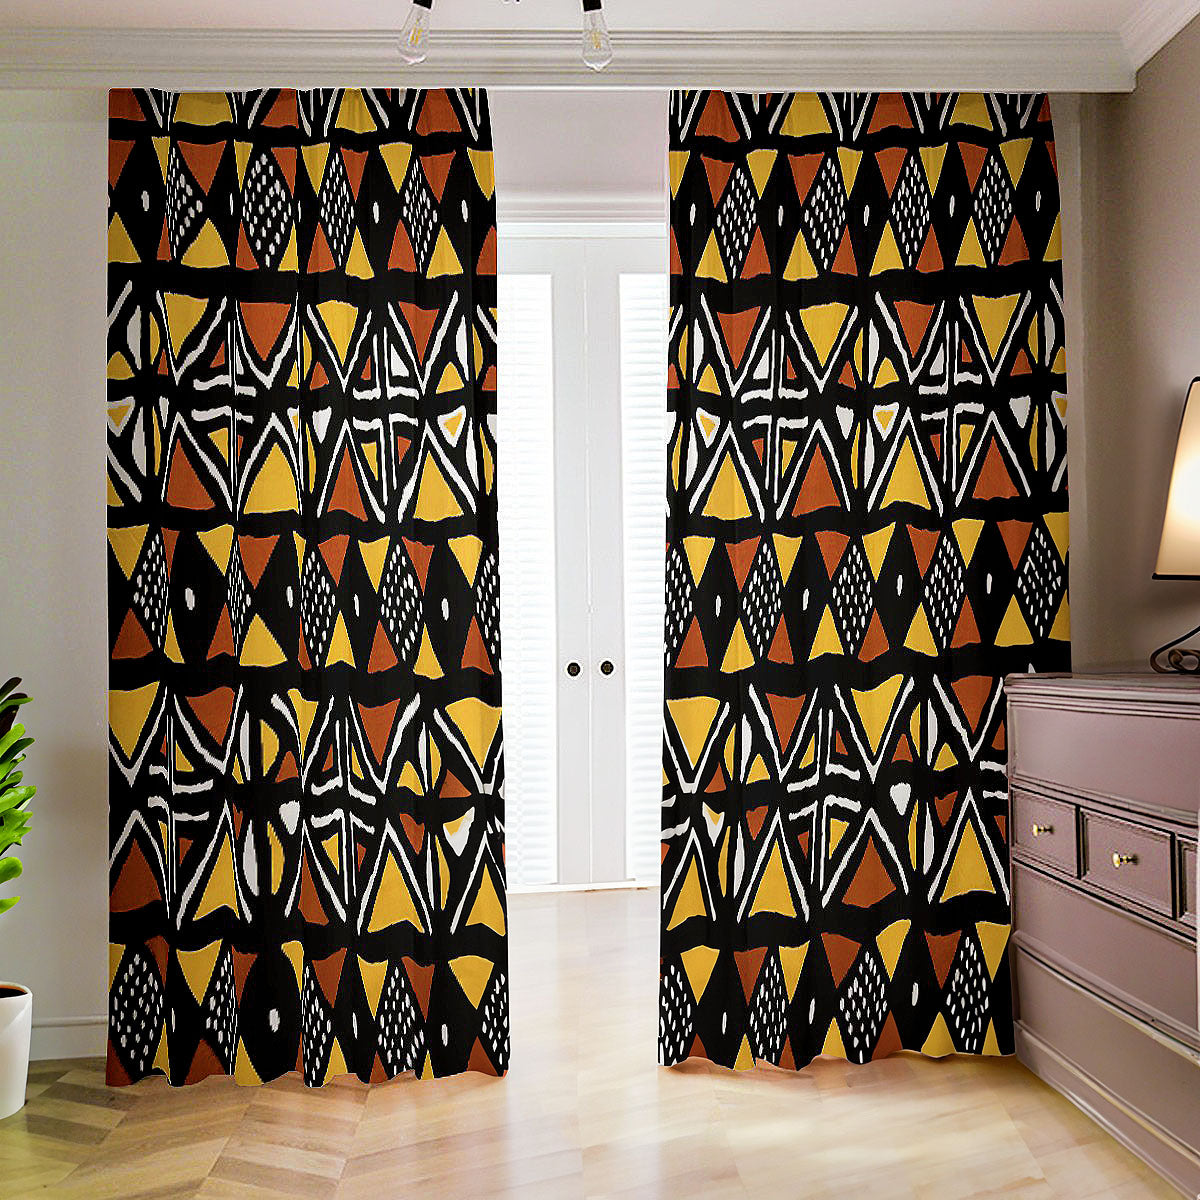 Handmade Blackout Curtain in African Mudcloth Print - Bynelo